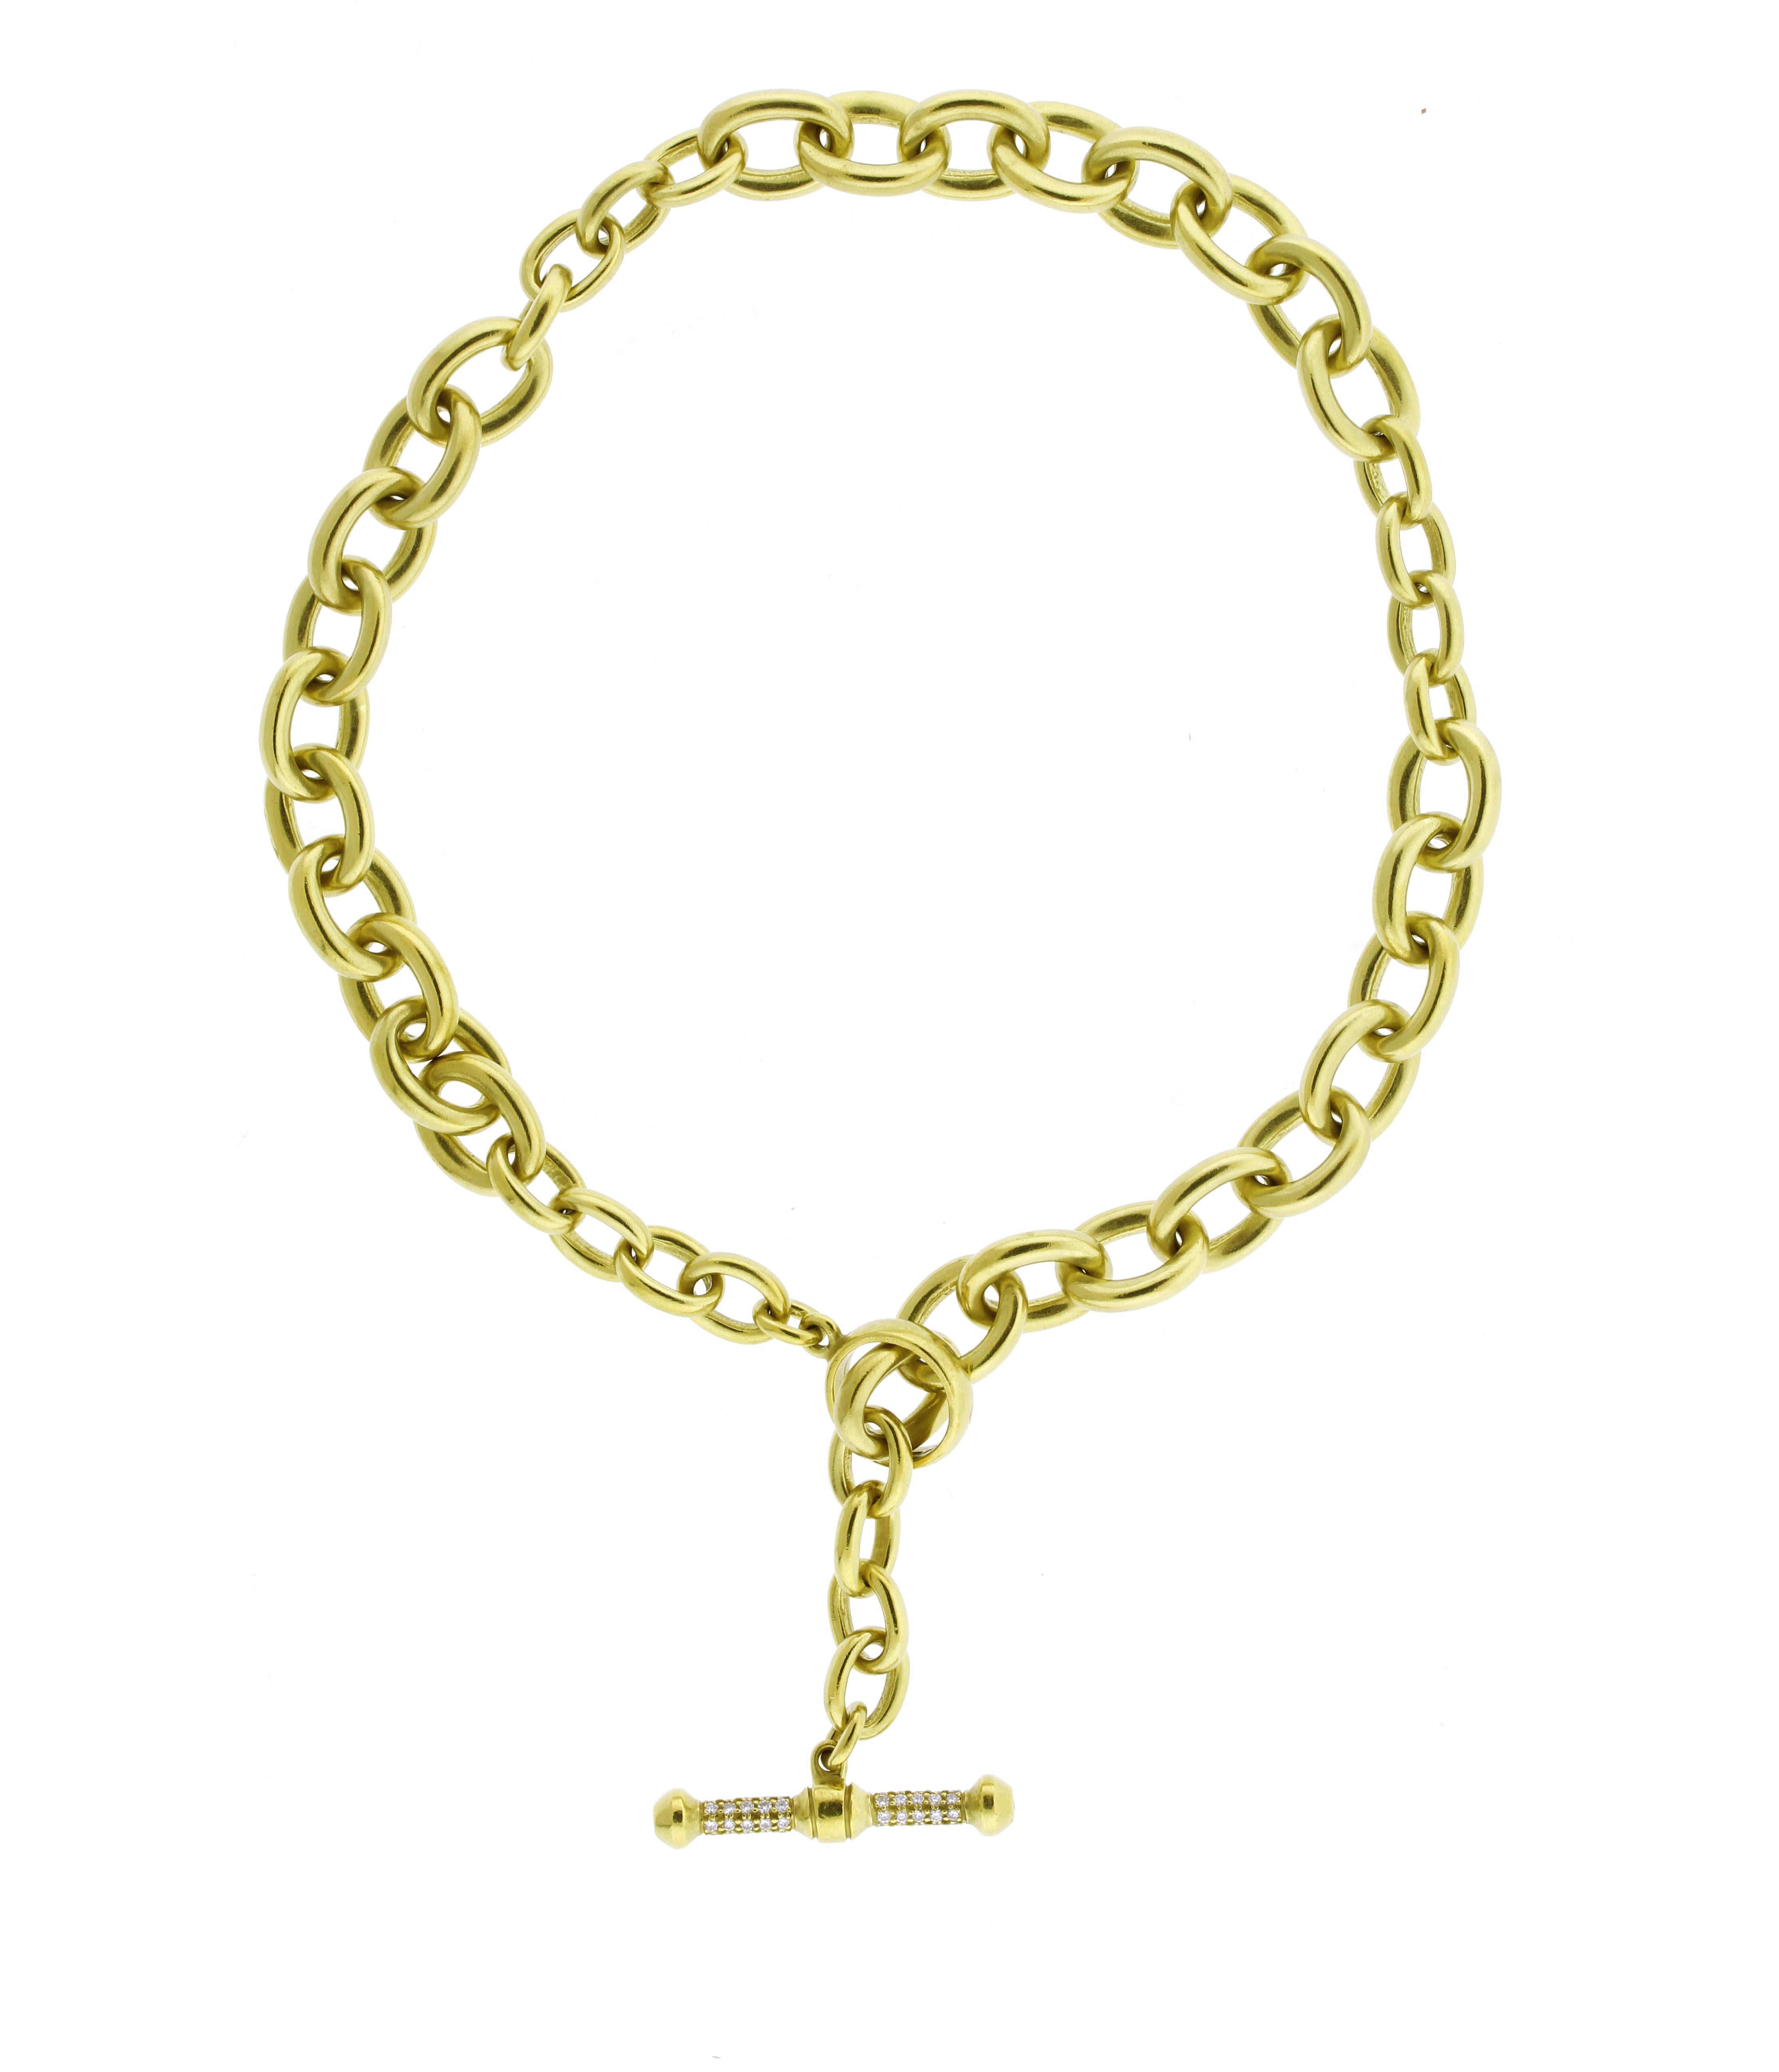 Women's or Men's Barry Keiselstein Cord Gold Oval Chain Necklace with a Diamond Toggle For Sale